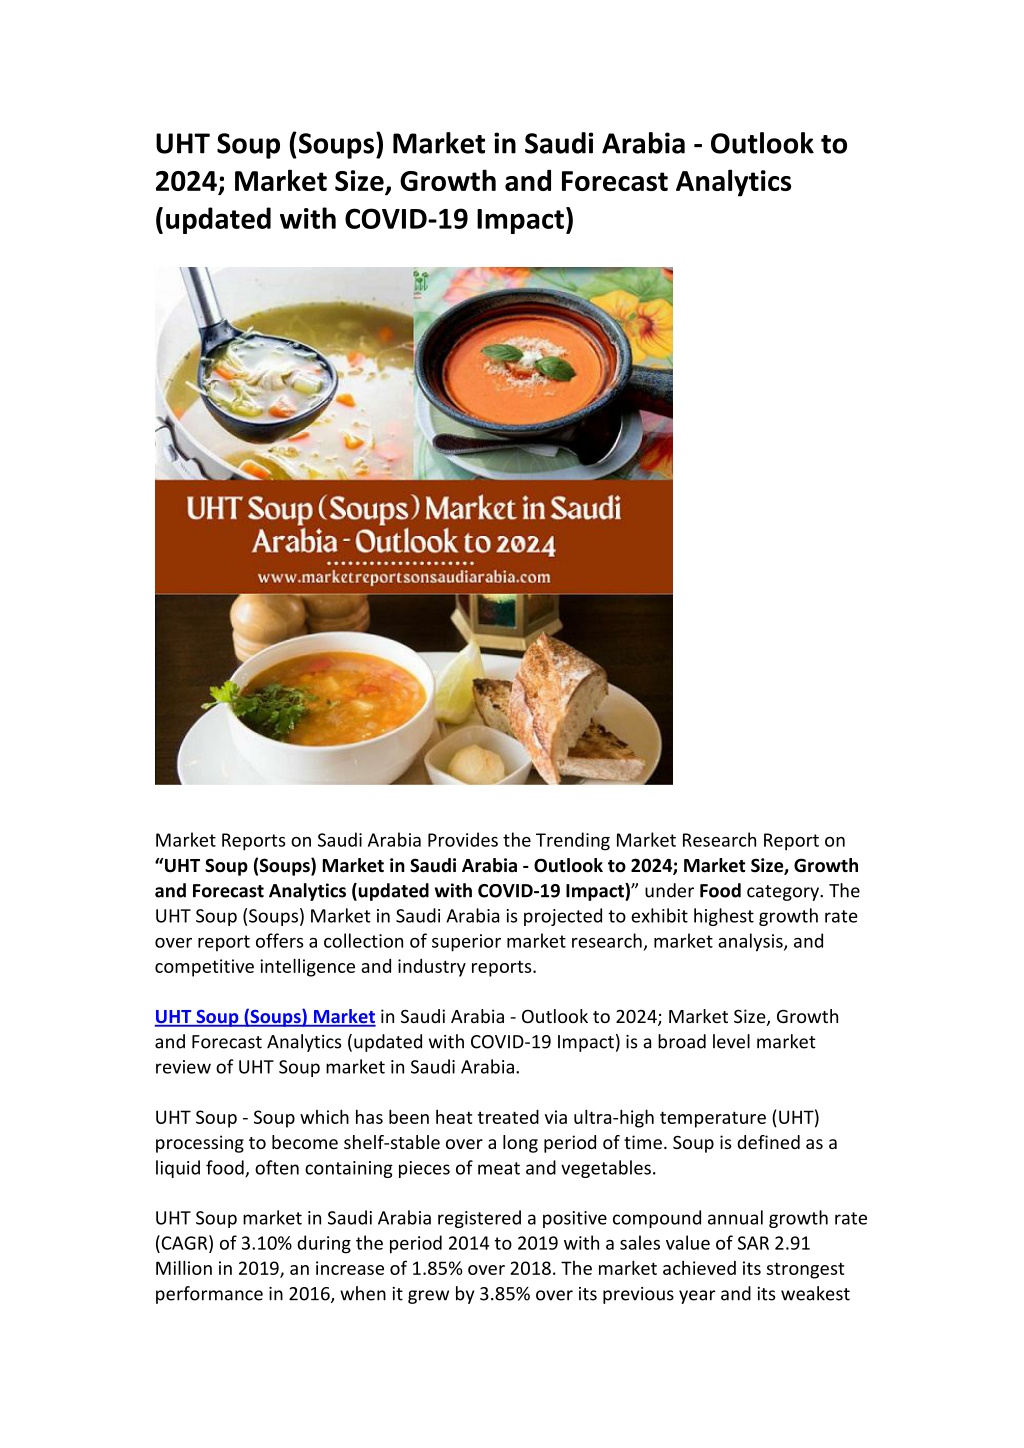 PPT UHT Soup (Soups) Market in Saudi Arabia Outlook to 2024